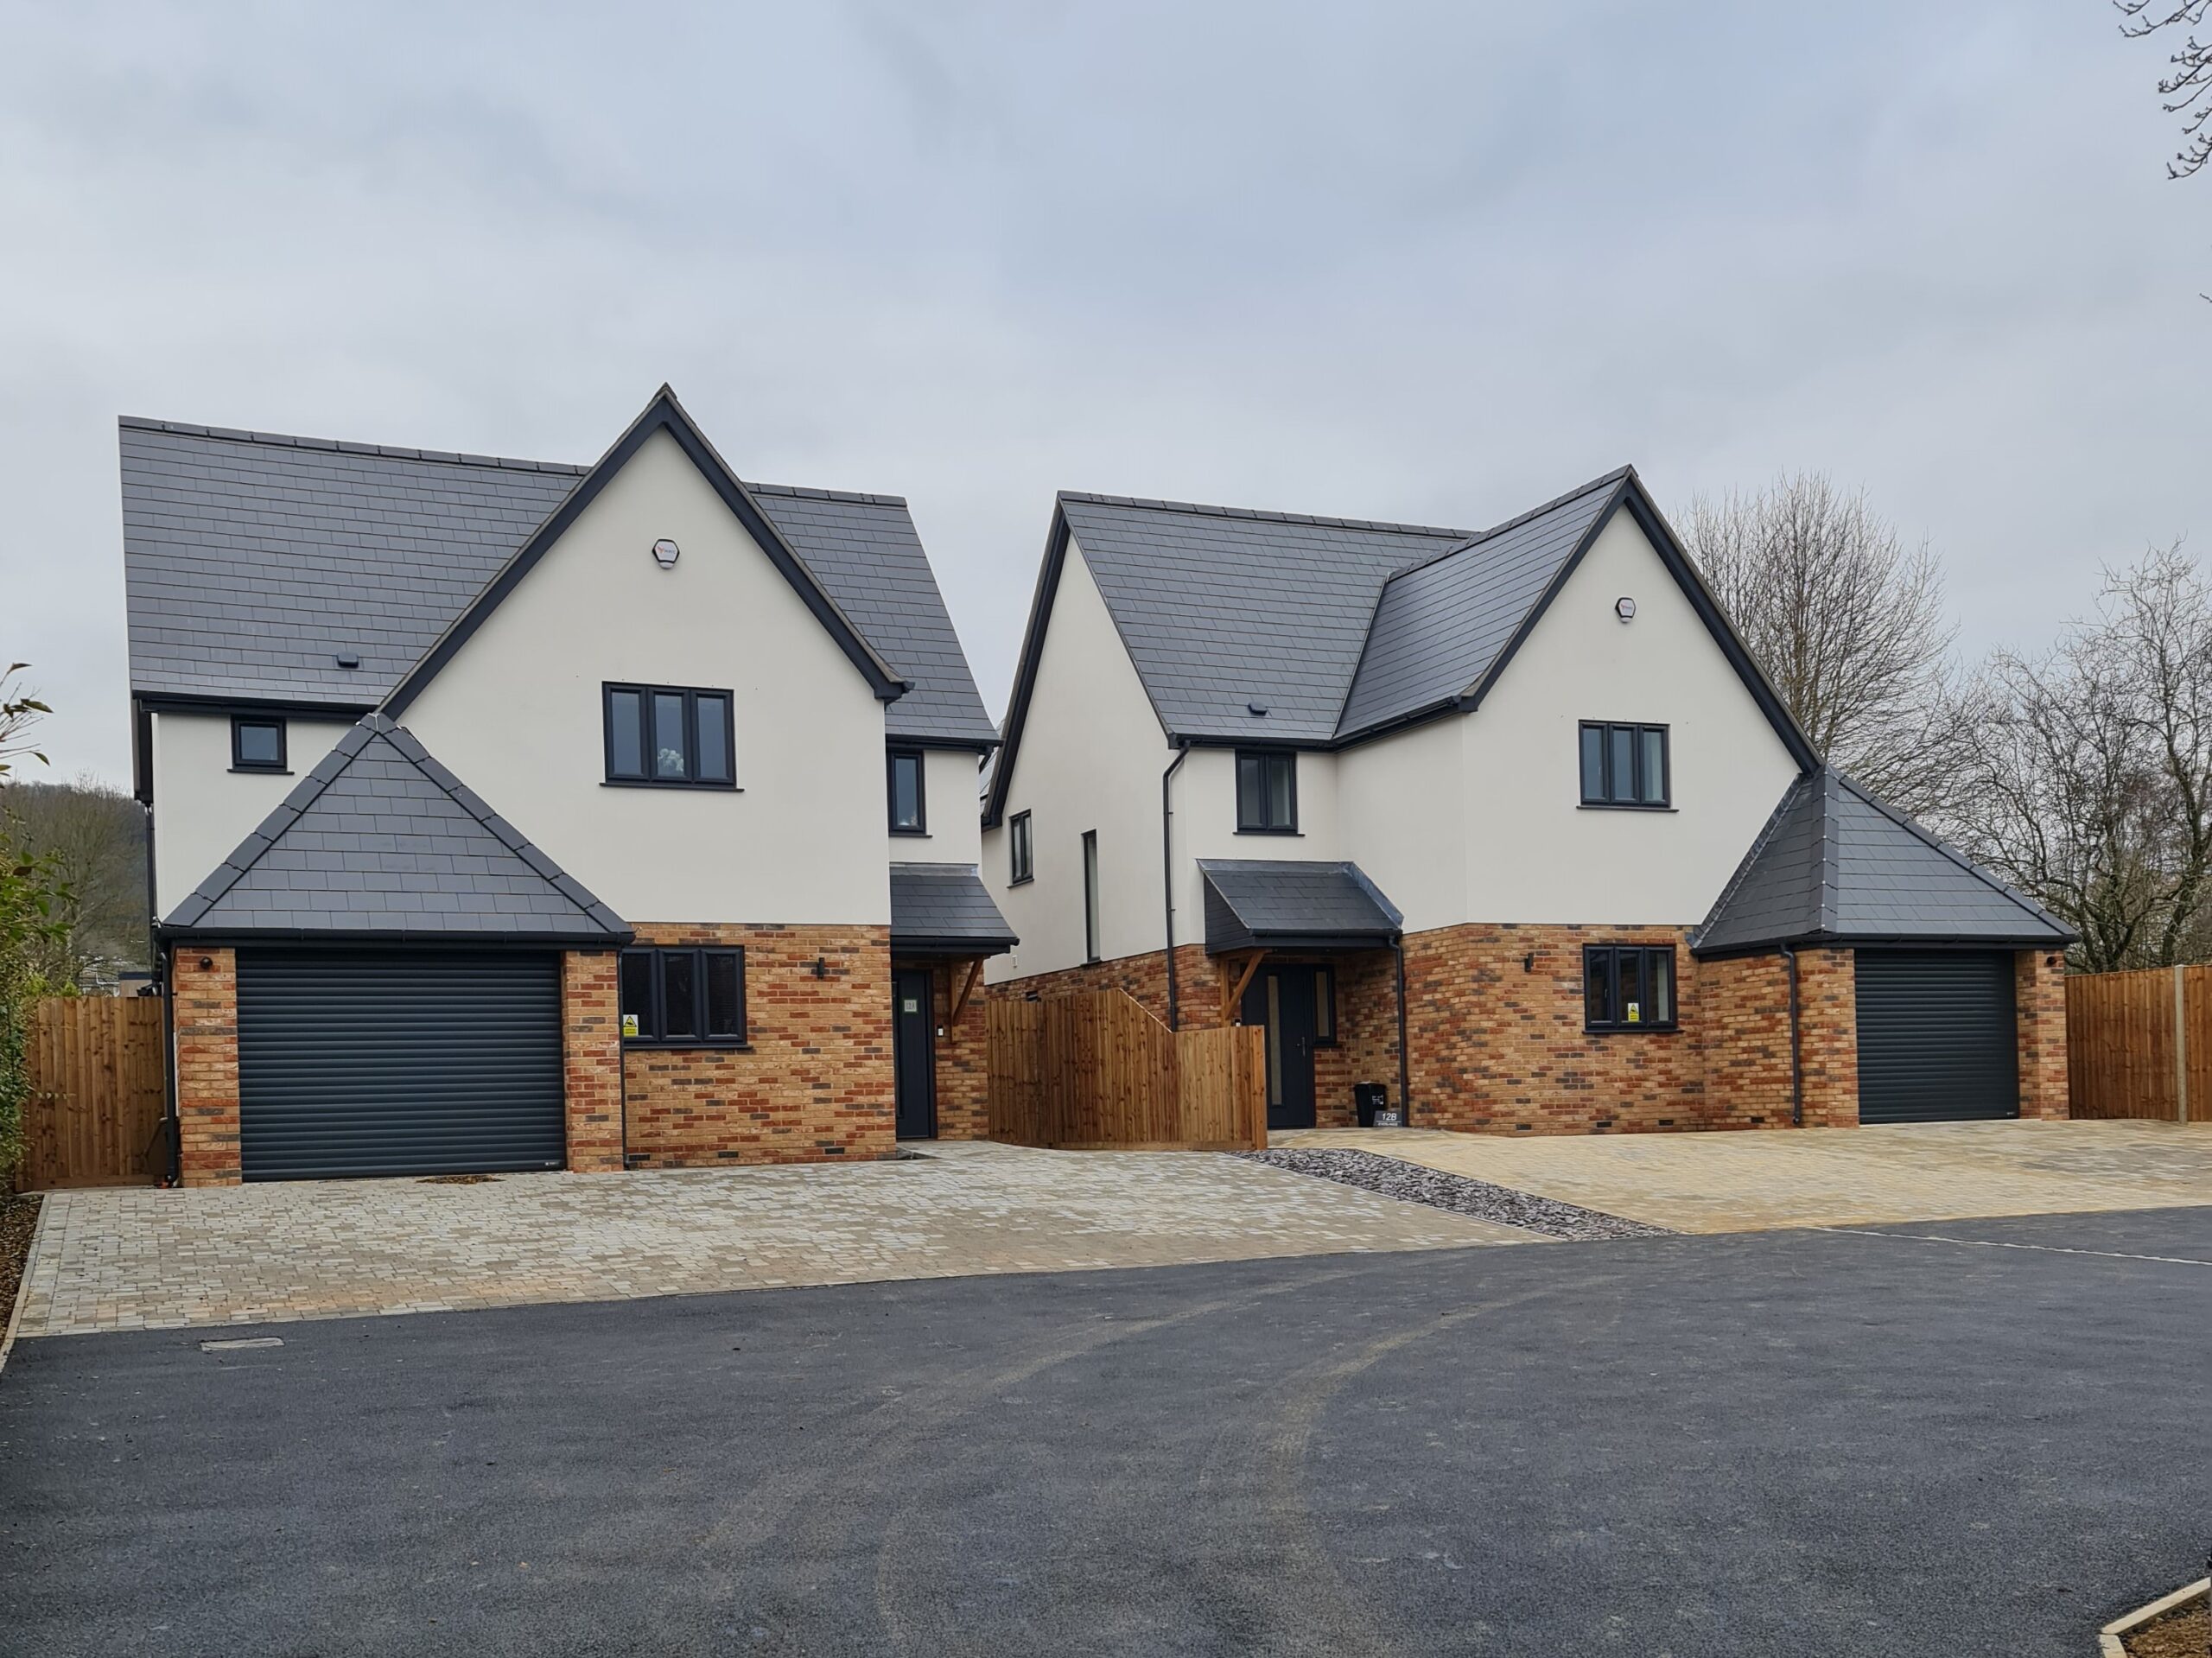 Two Orchard Homes Glos new build homes - sold. Services.